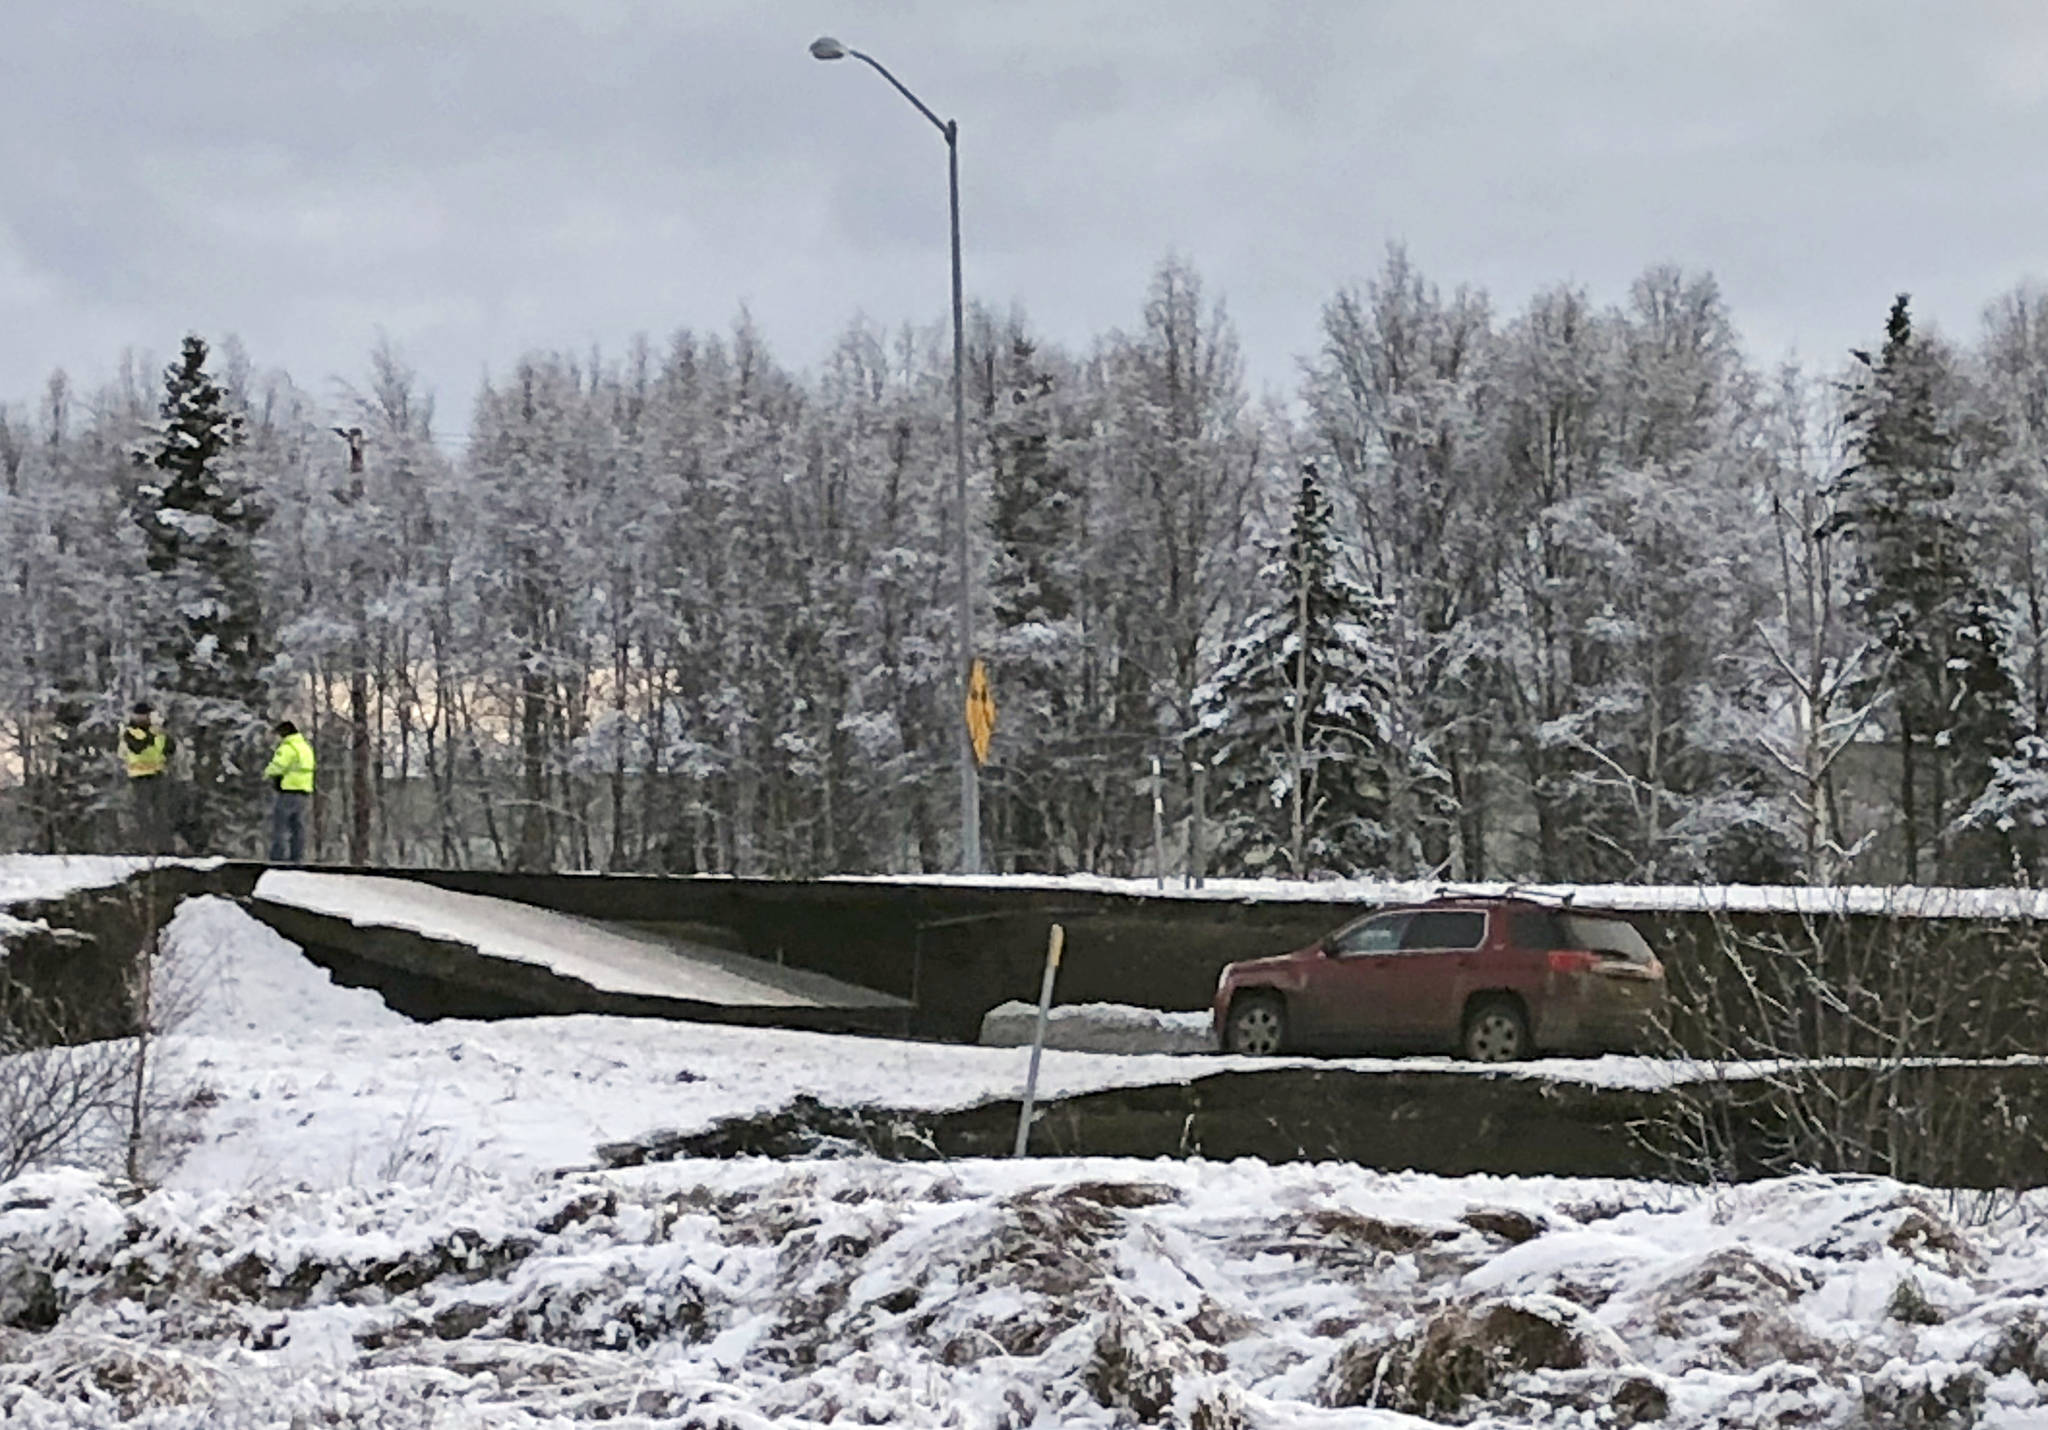 A car is trapped on a collapsed section of the offramp off of Minnesota Drive in Anchorage, Friday, Nov. 30, 2018. Back-to-back earthquakes measuring 7.0 and 5.8 rocked buildings and buckled roads Friday morning in Anchorage, prompting people to run from their offices or seek shelter under office desks, while a tsunami warning had some seeking higher ground. (AP Photo/Dan Joling)